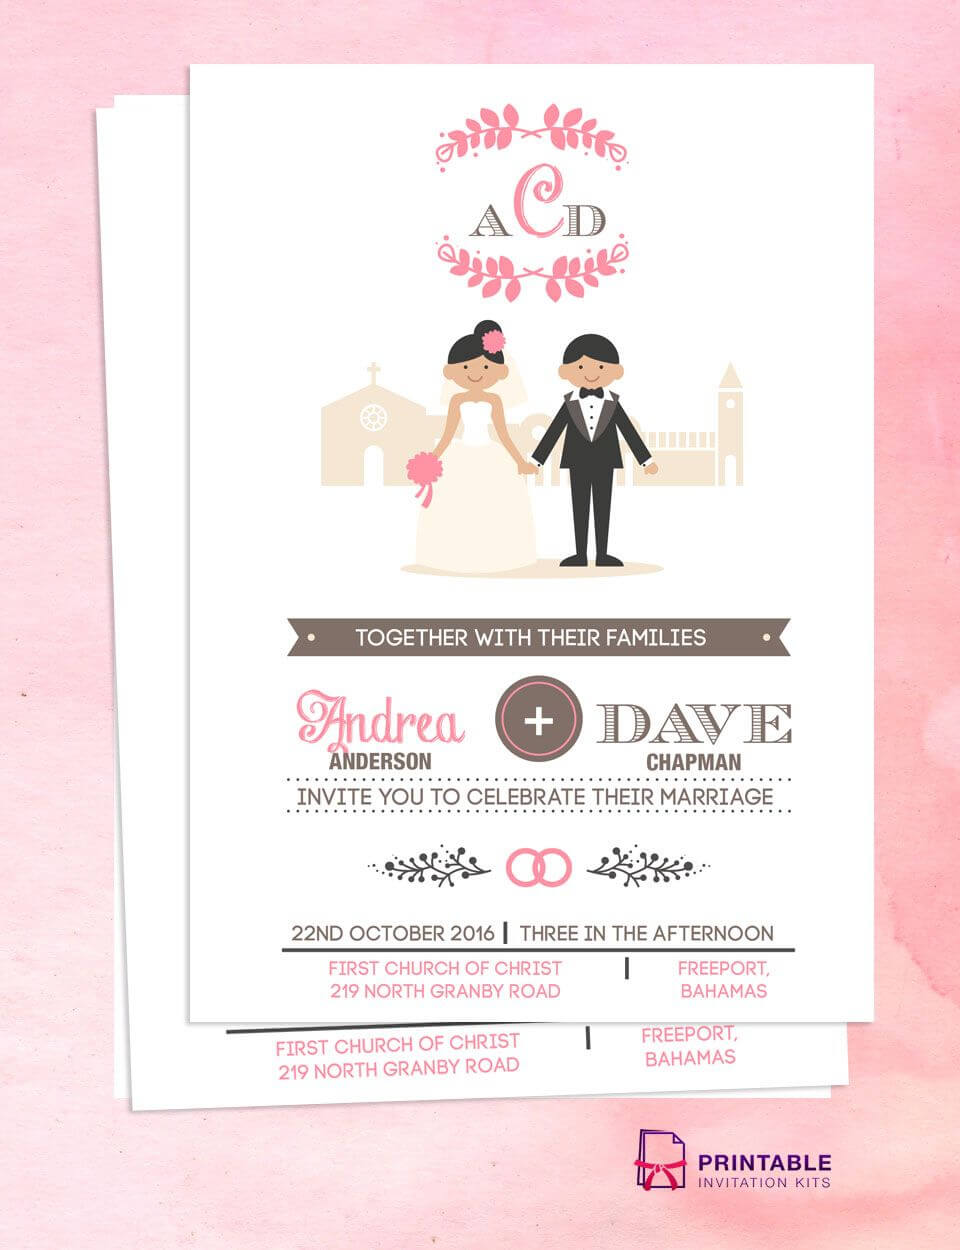 Illustrated Couple In Front Of Church Wedding Invitation With Church Invite Cards Template